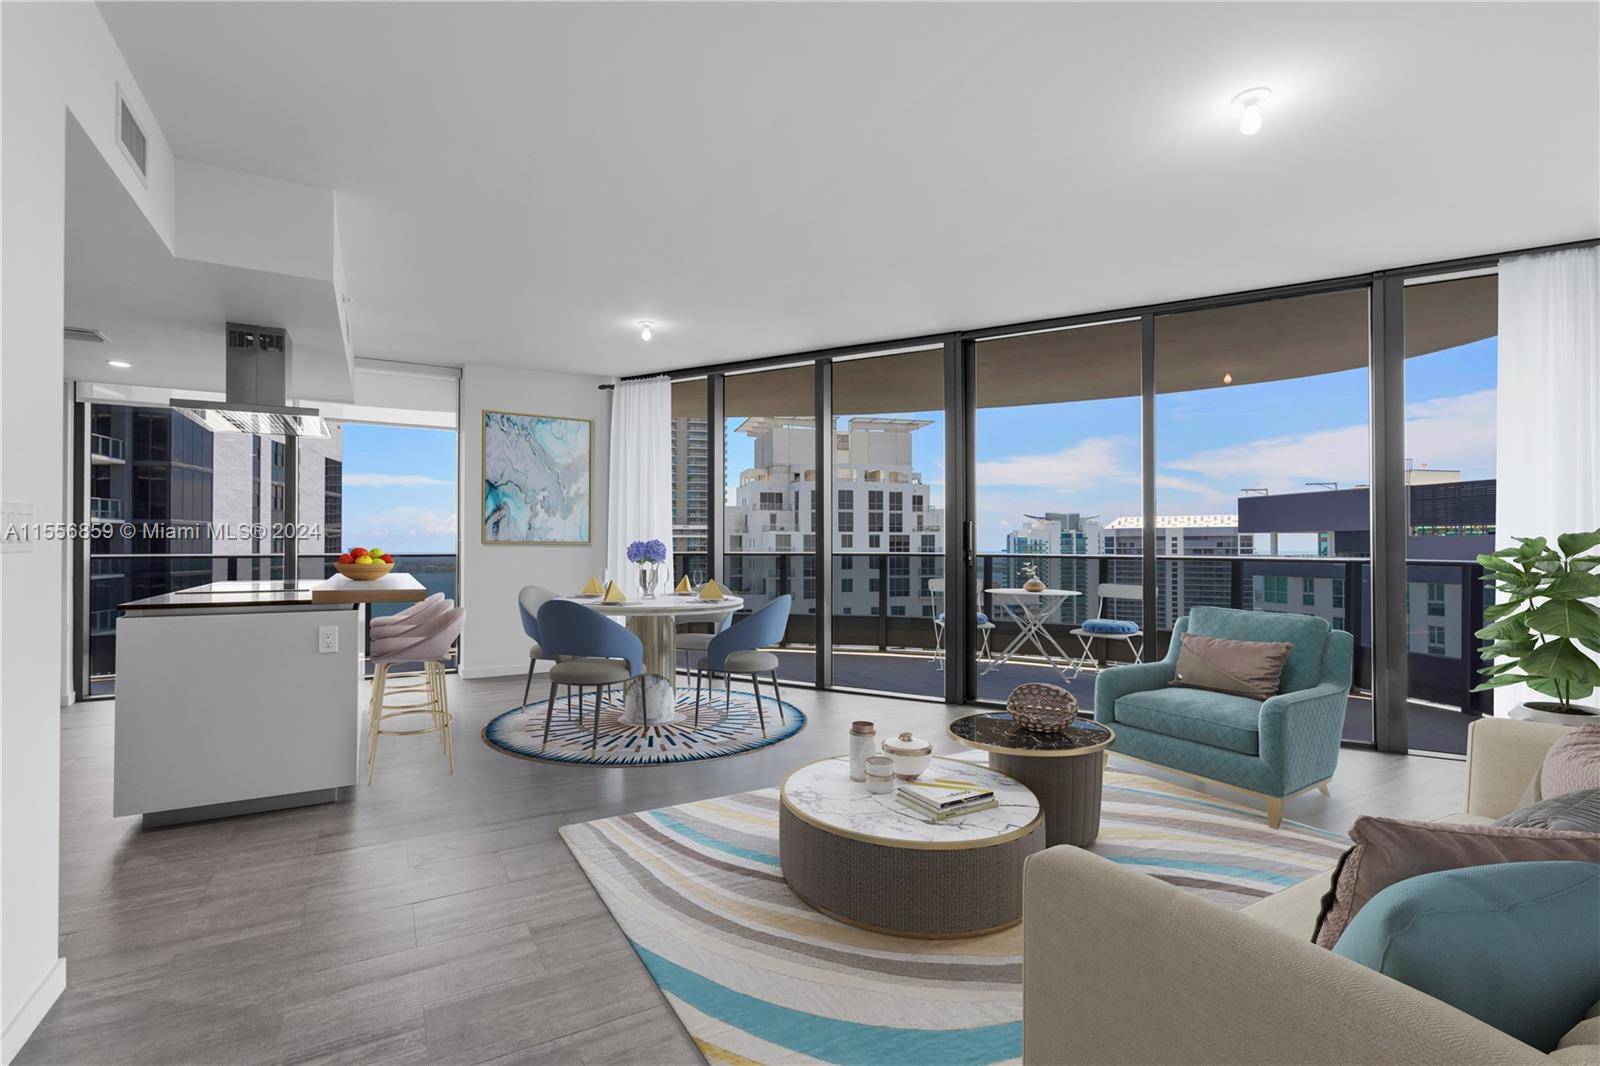 Introducing a stunning apartment at the coveted Lane 01 east view at Brickell Flatiron !